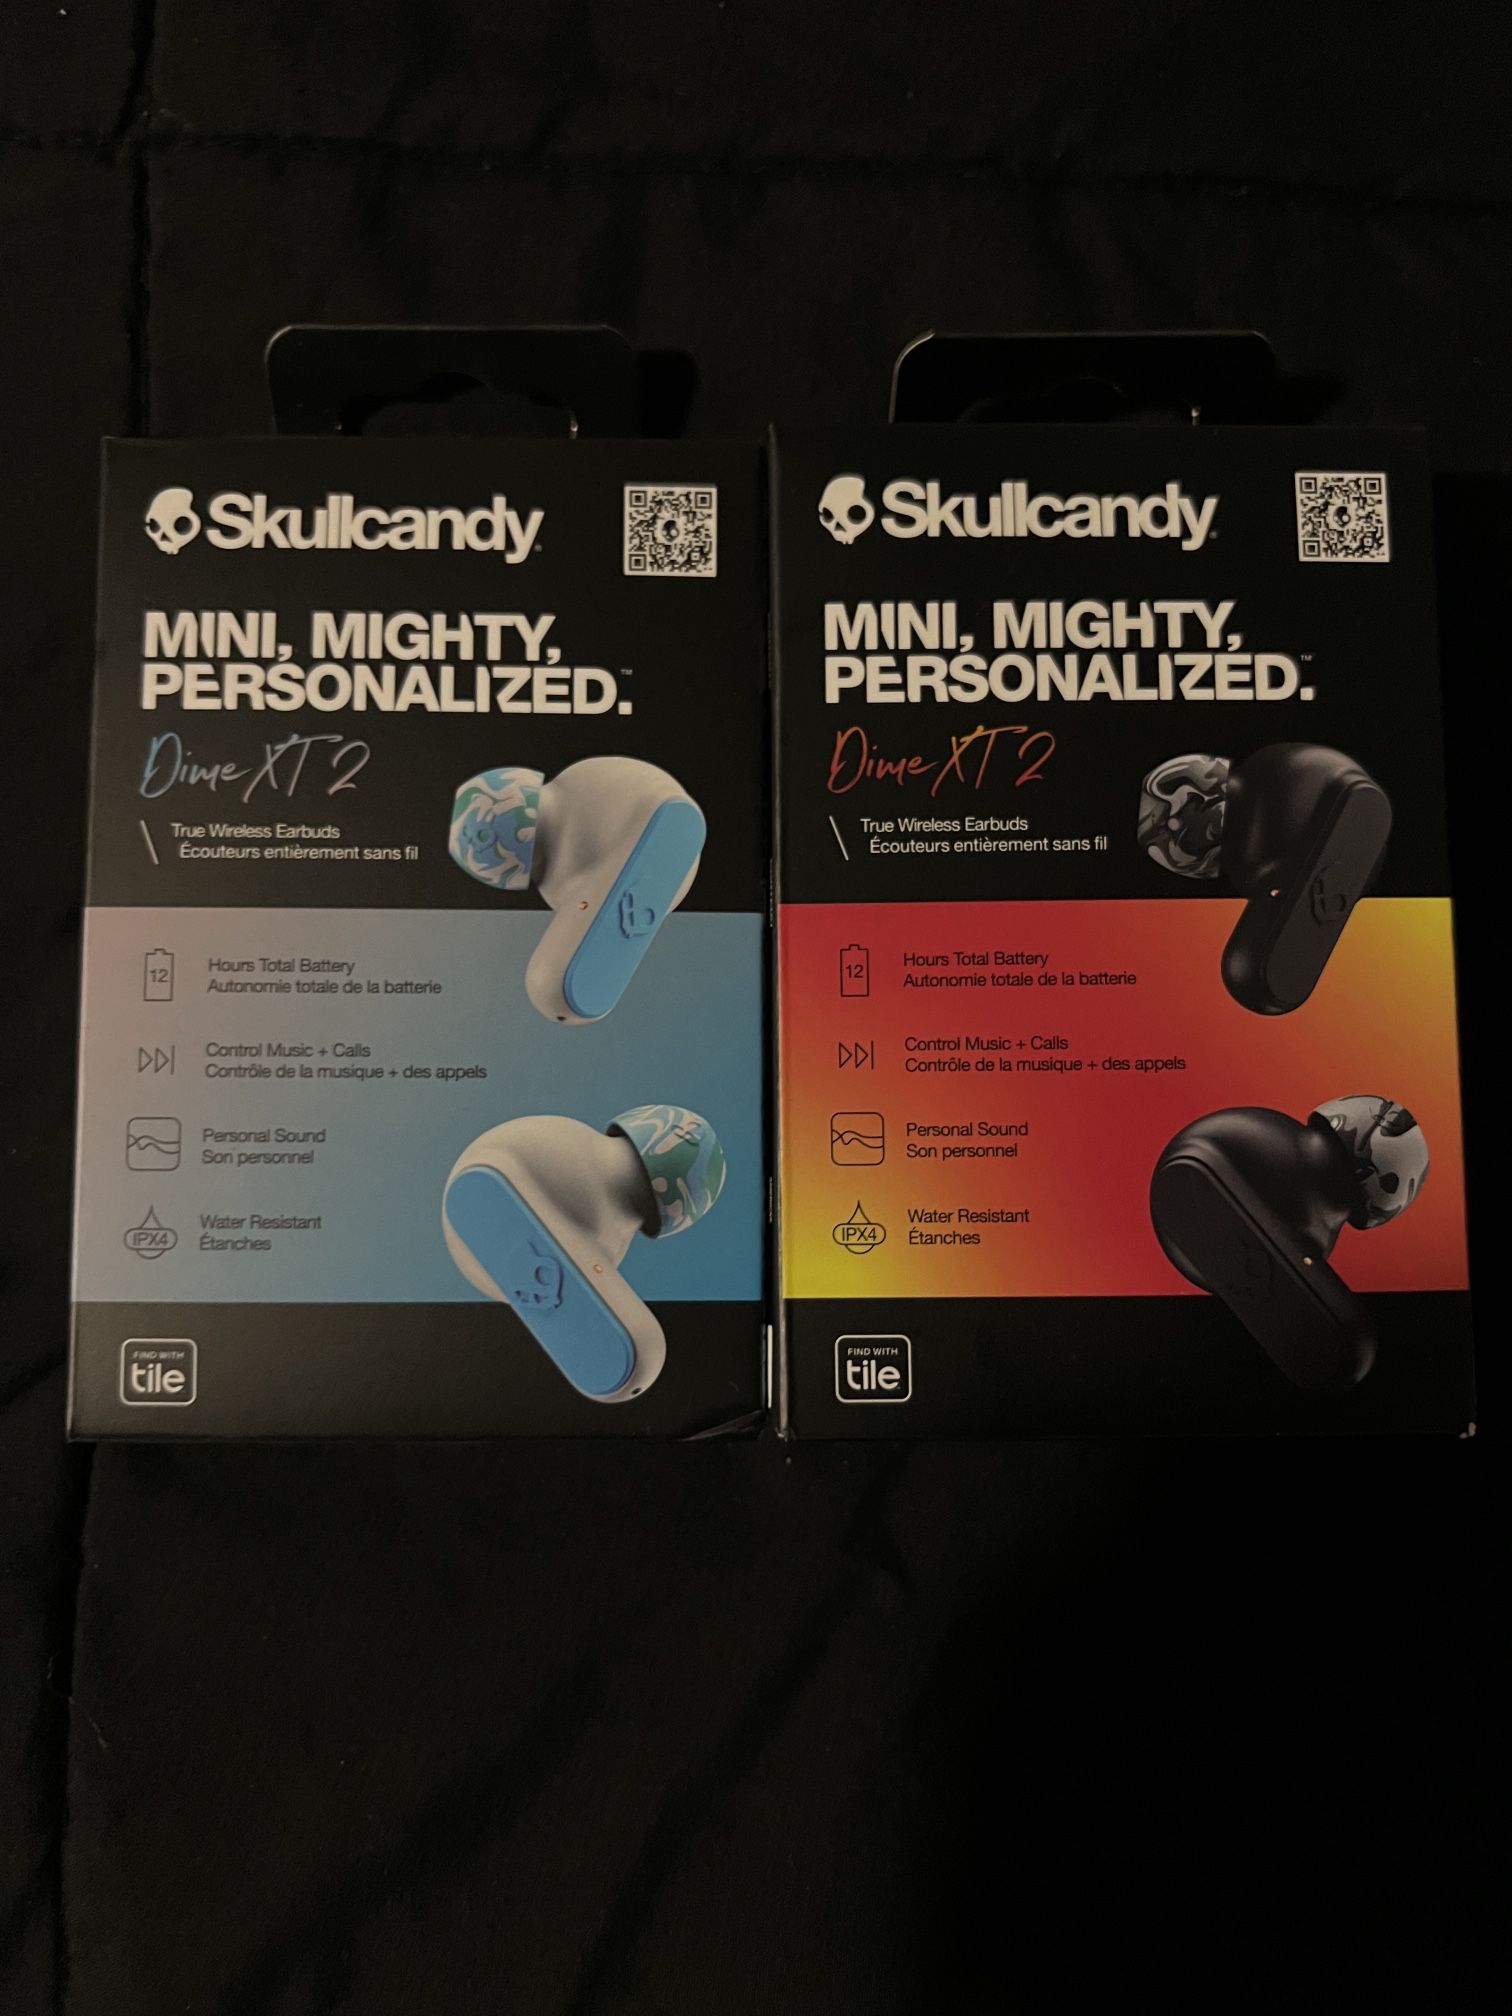 Skullcandy Dime XT 2 True Wireless Earbuds With Personal Sound